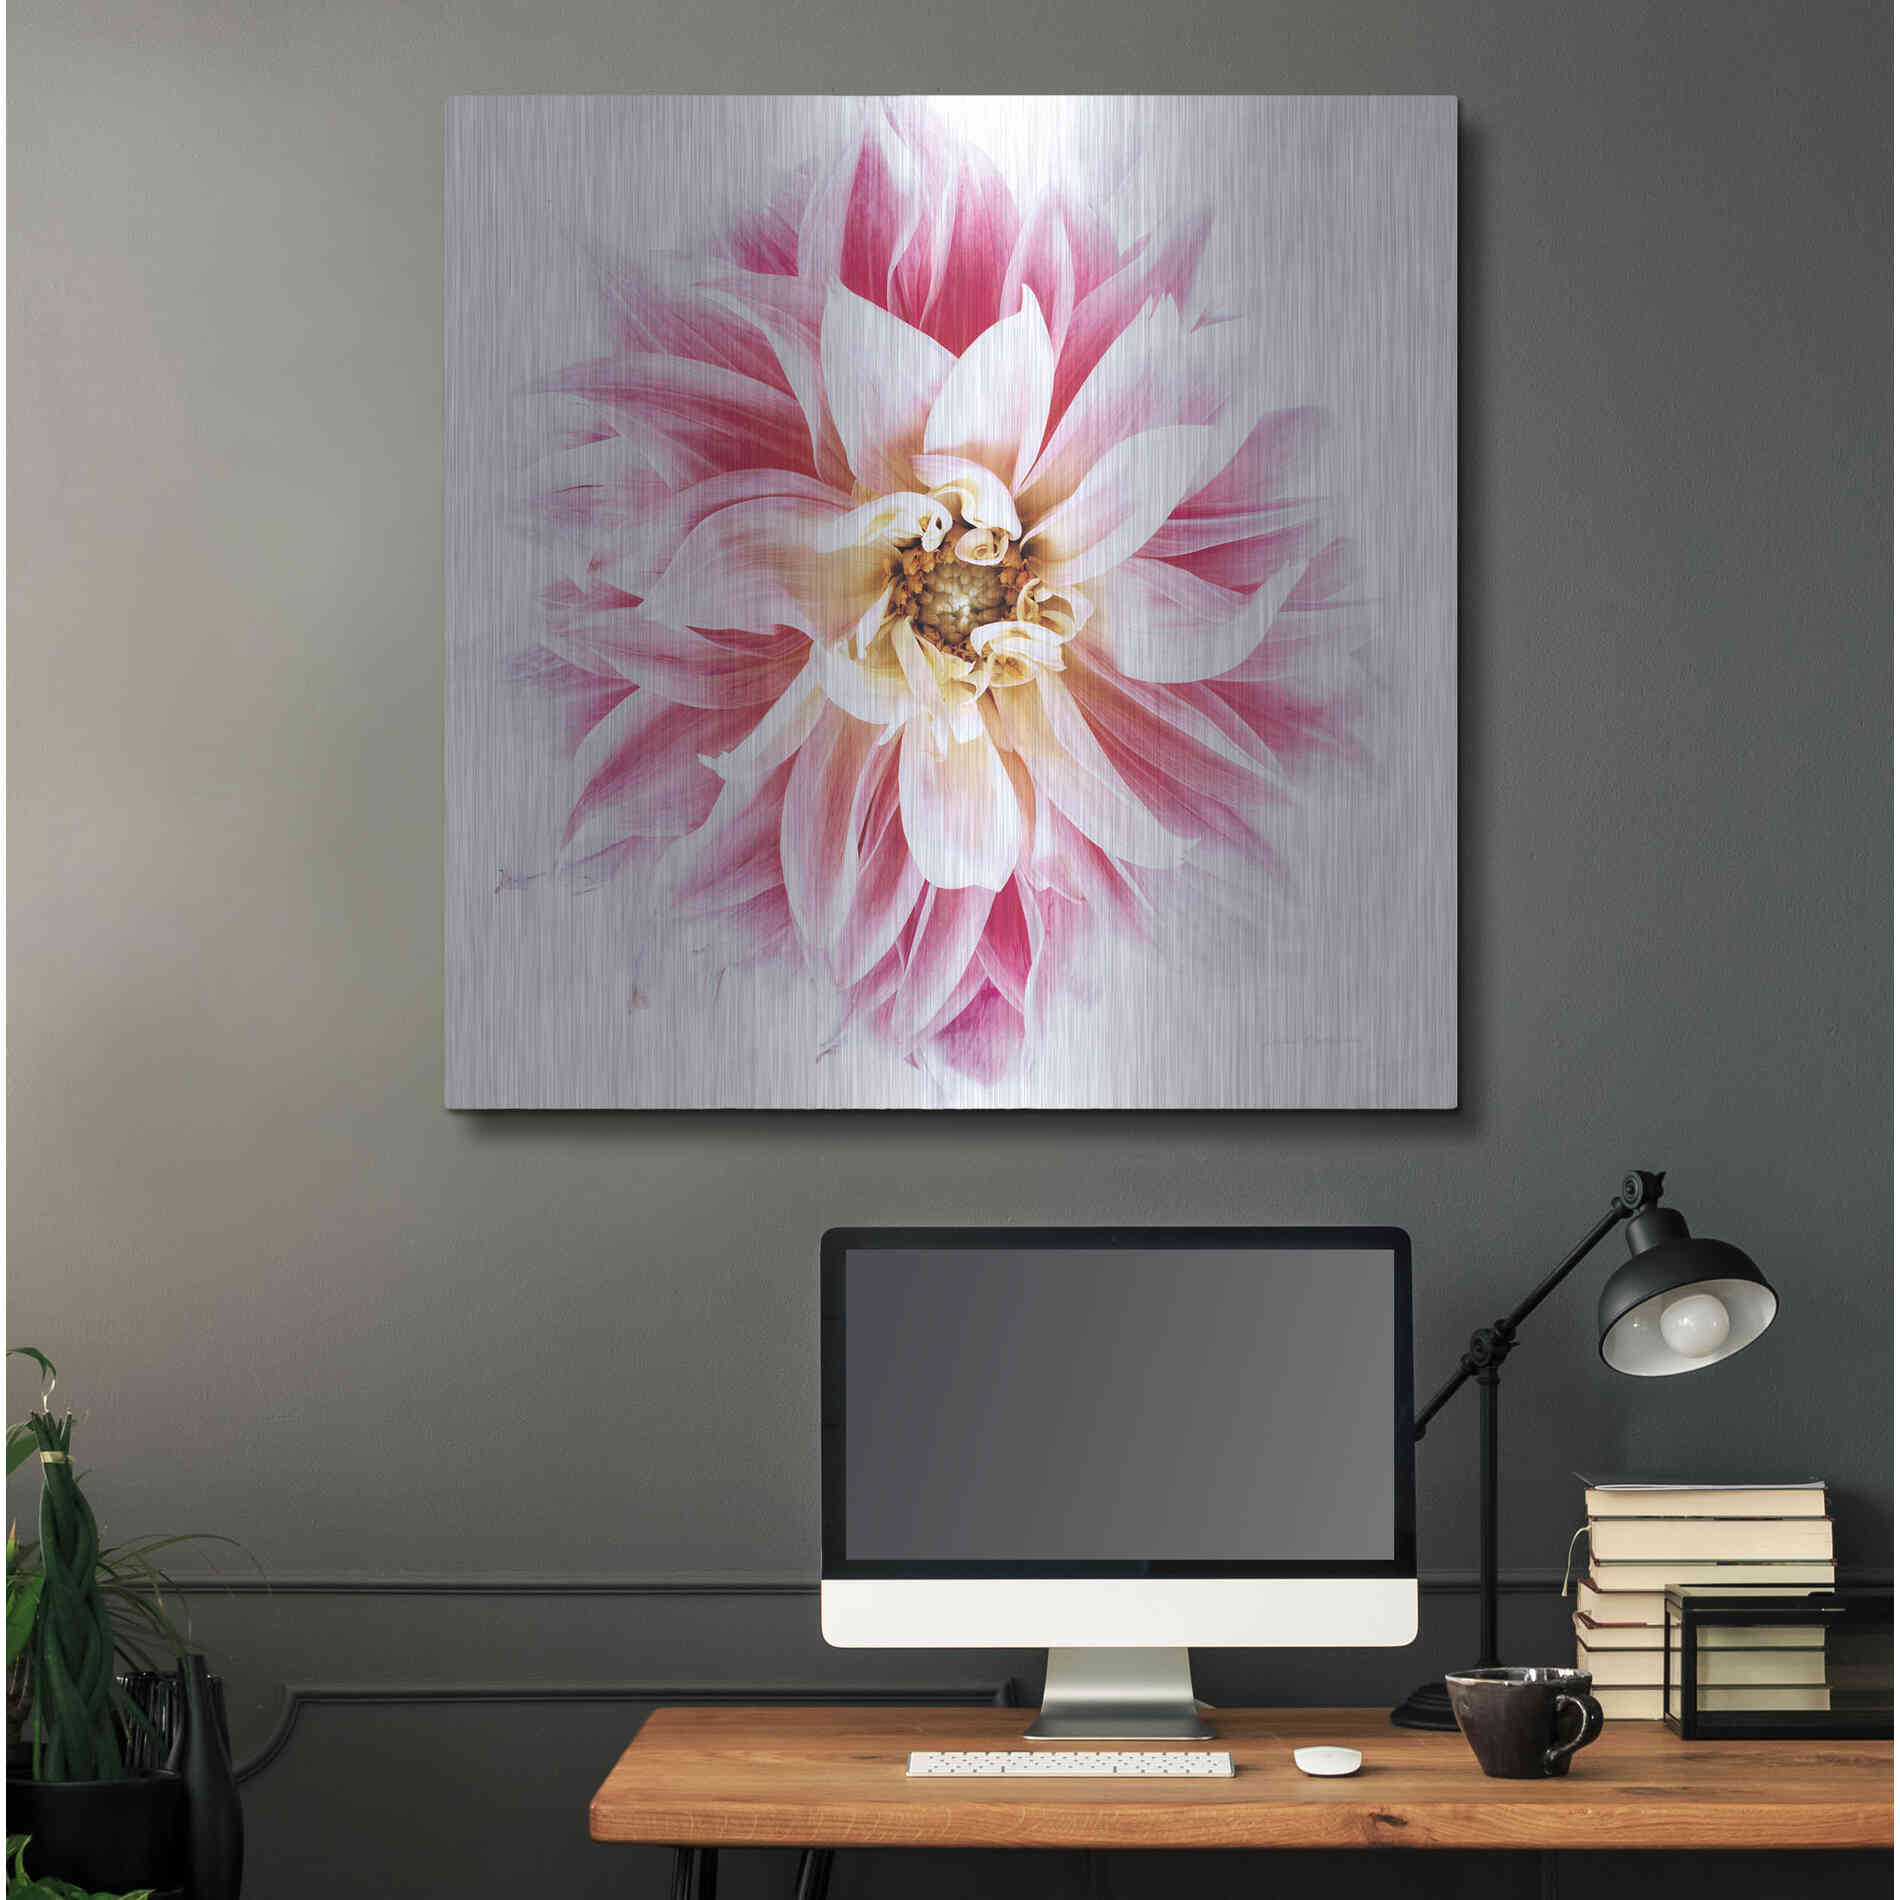 Luxe Metal Art 'Pink Dahlia' by Elise Catterall, Metal Wall Art,36x36